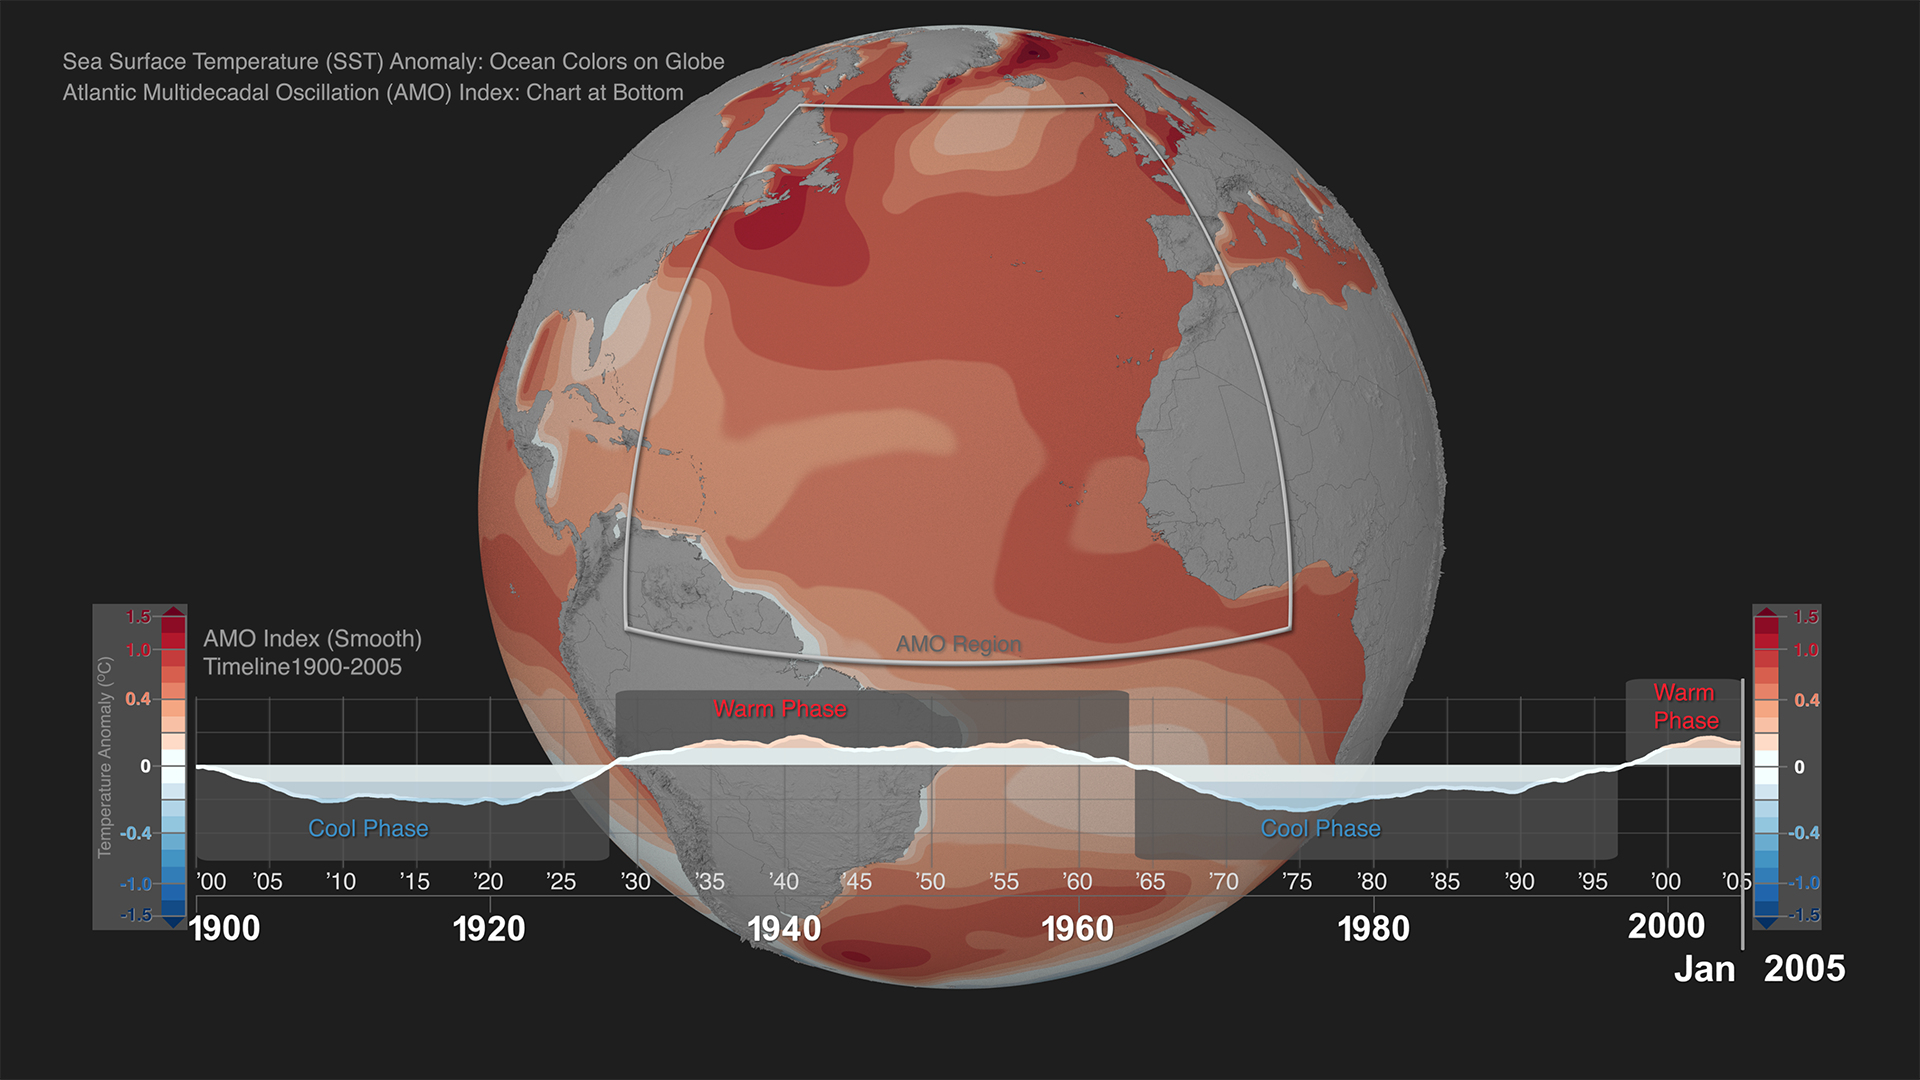 Preview Image for Historical Atlantic Multidecadal Oscillation (AMO)